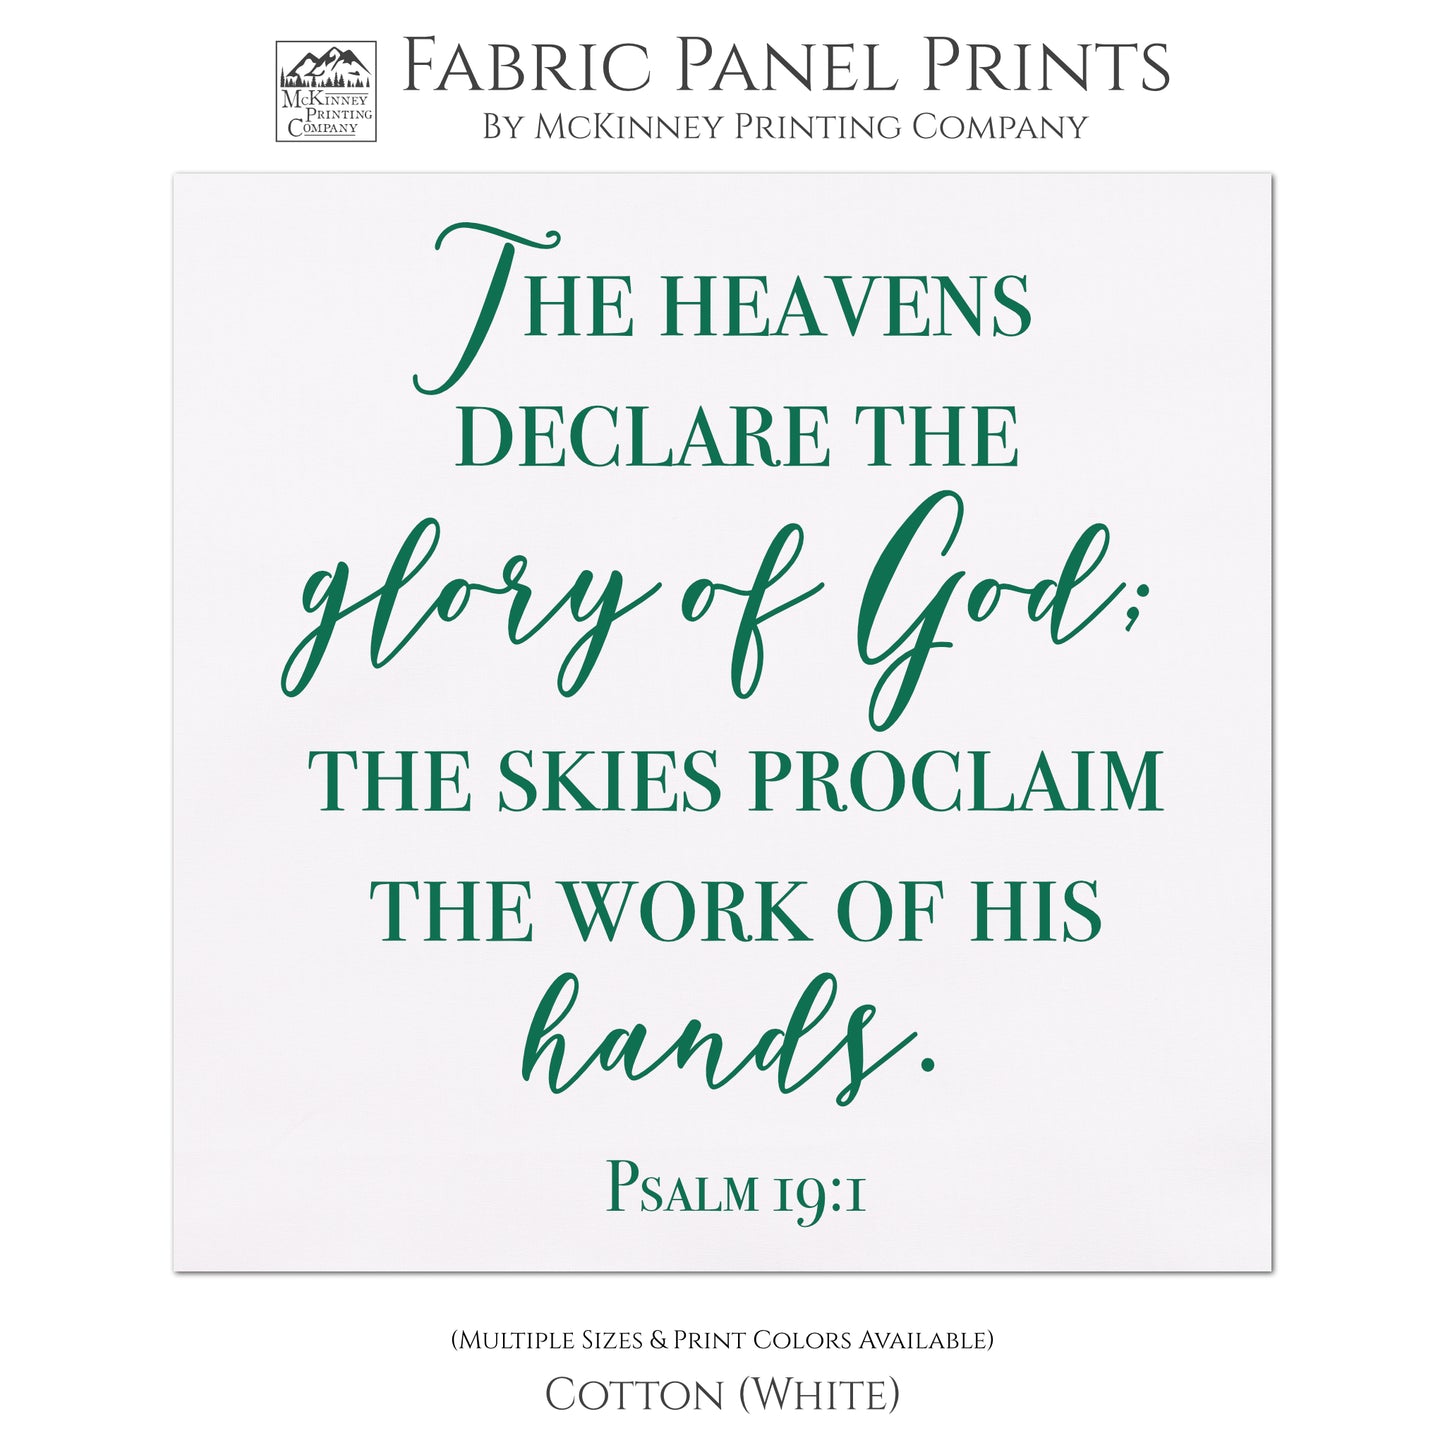 The heavens declare the glory of God; the sky's proclaim the work of his hands - Psalm 19:1 - Religious Cotton Fabric, Large Print Quilt Block - Cotton, White